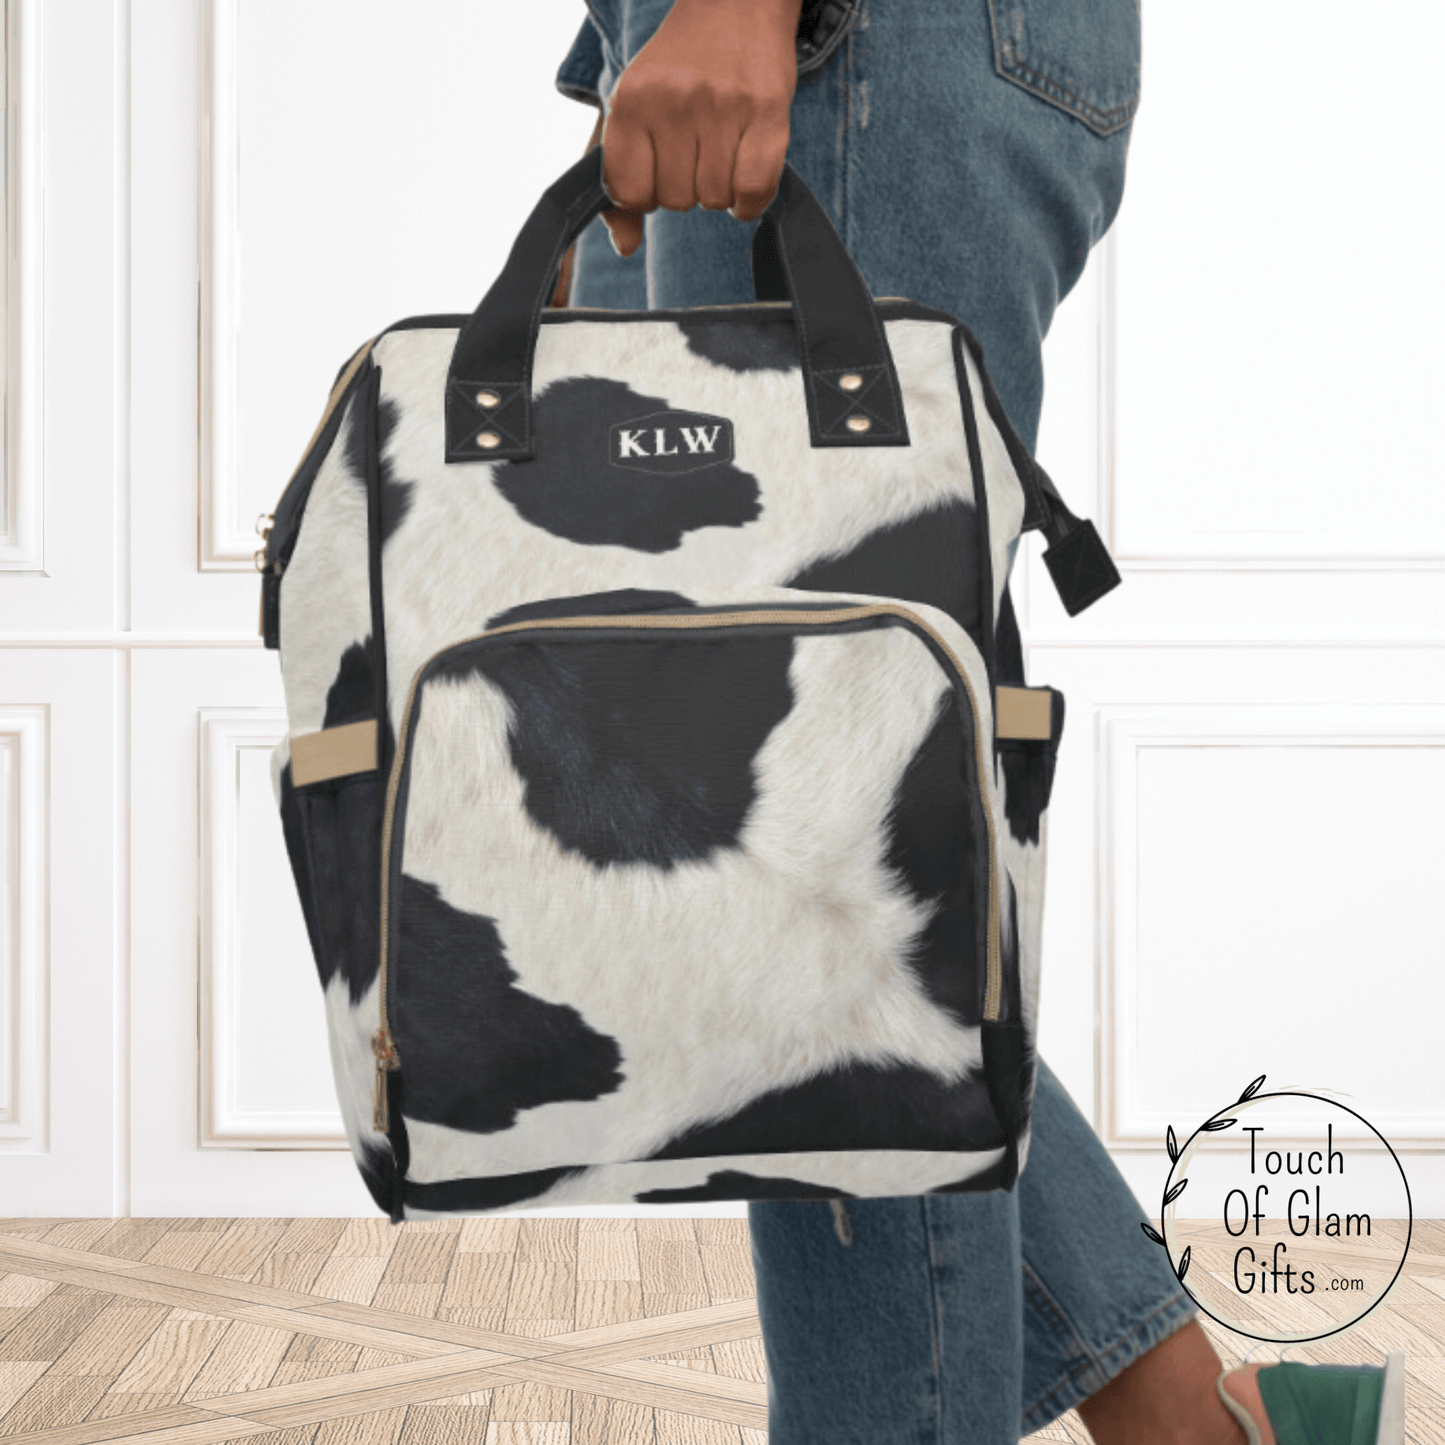 Our black and white cowhide backpack can be carried with handles too as shown here.